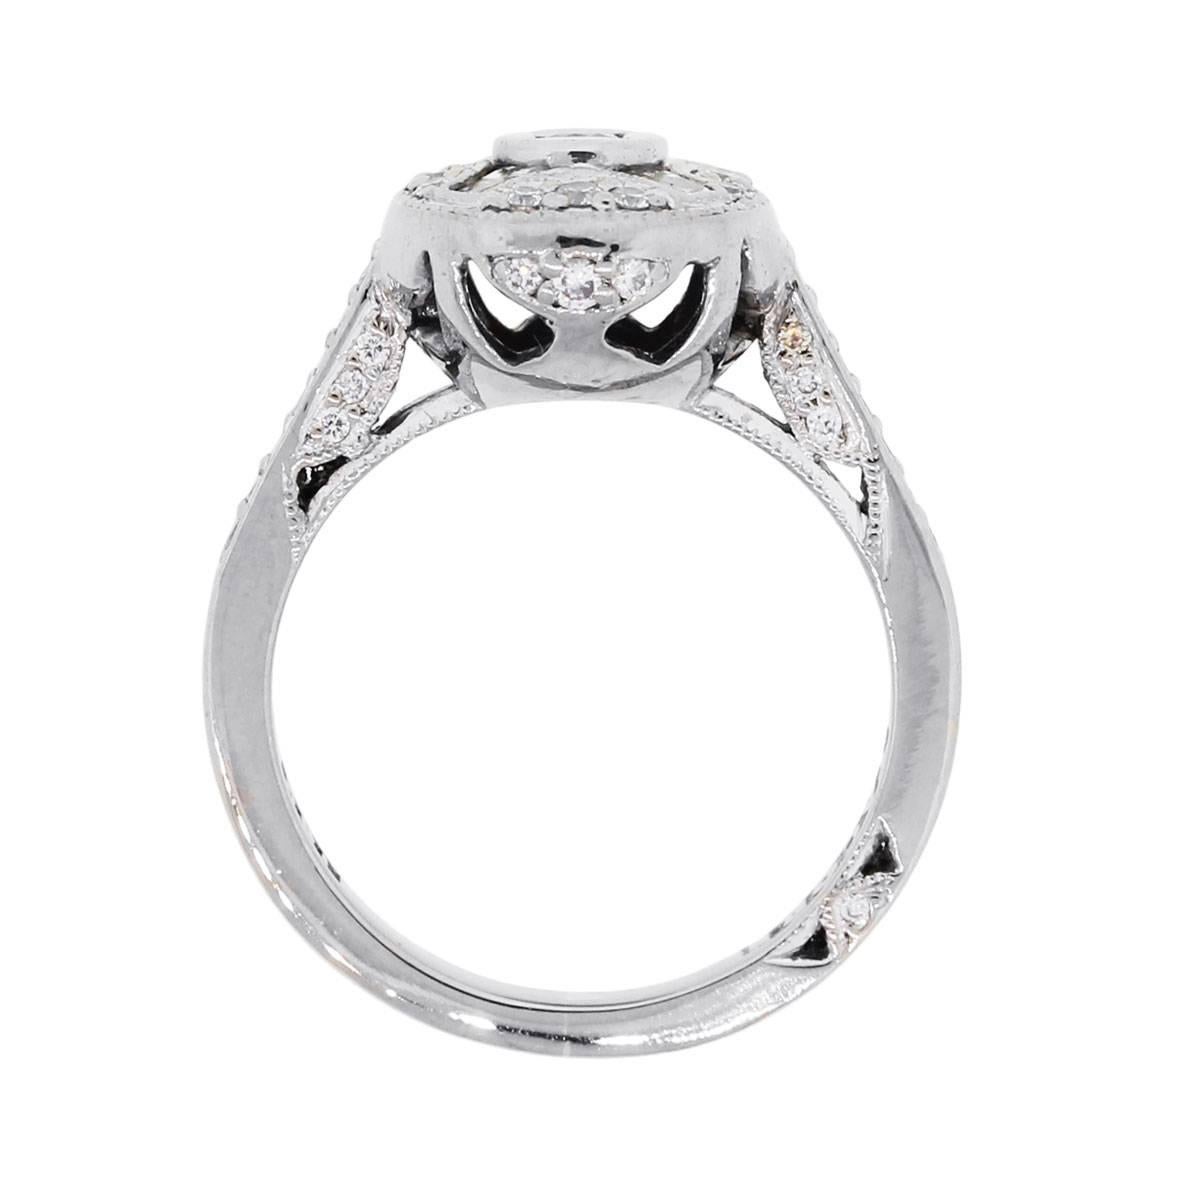 Designer: Tacori
Material: 18k white gold
Diamond Details: Approximately 0.50ctw of round brilliant and baguette shape diamonds. Diamonds are G in color and VS in clarity
Ring Size: 6 (can be sized)
Ring Measurements: 1″ x 0.43″ x 0.81″
Total